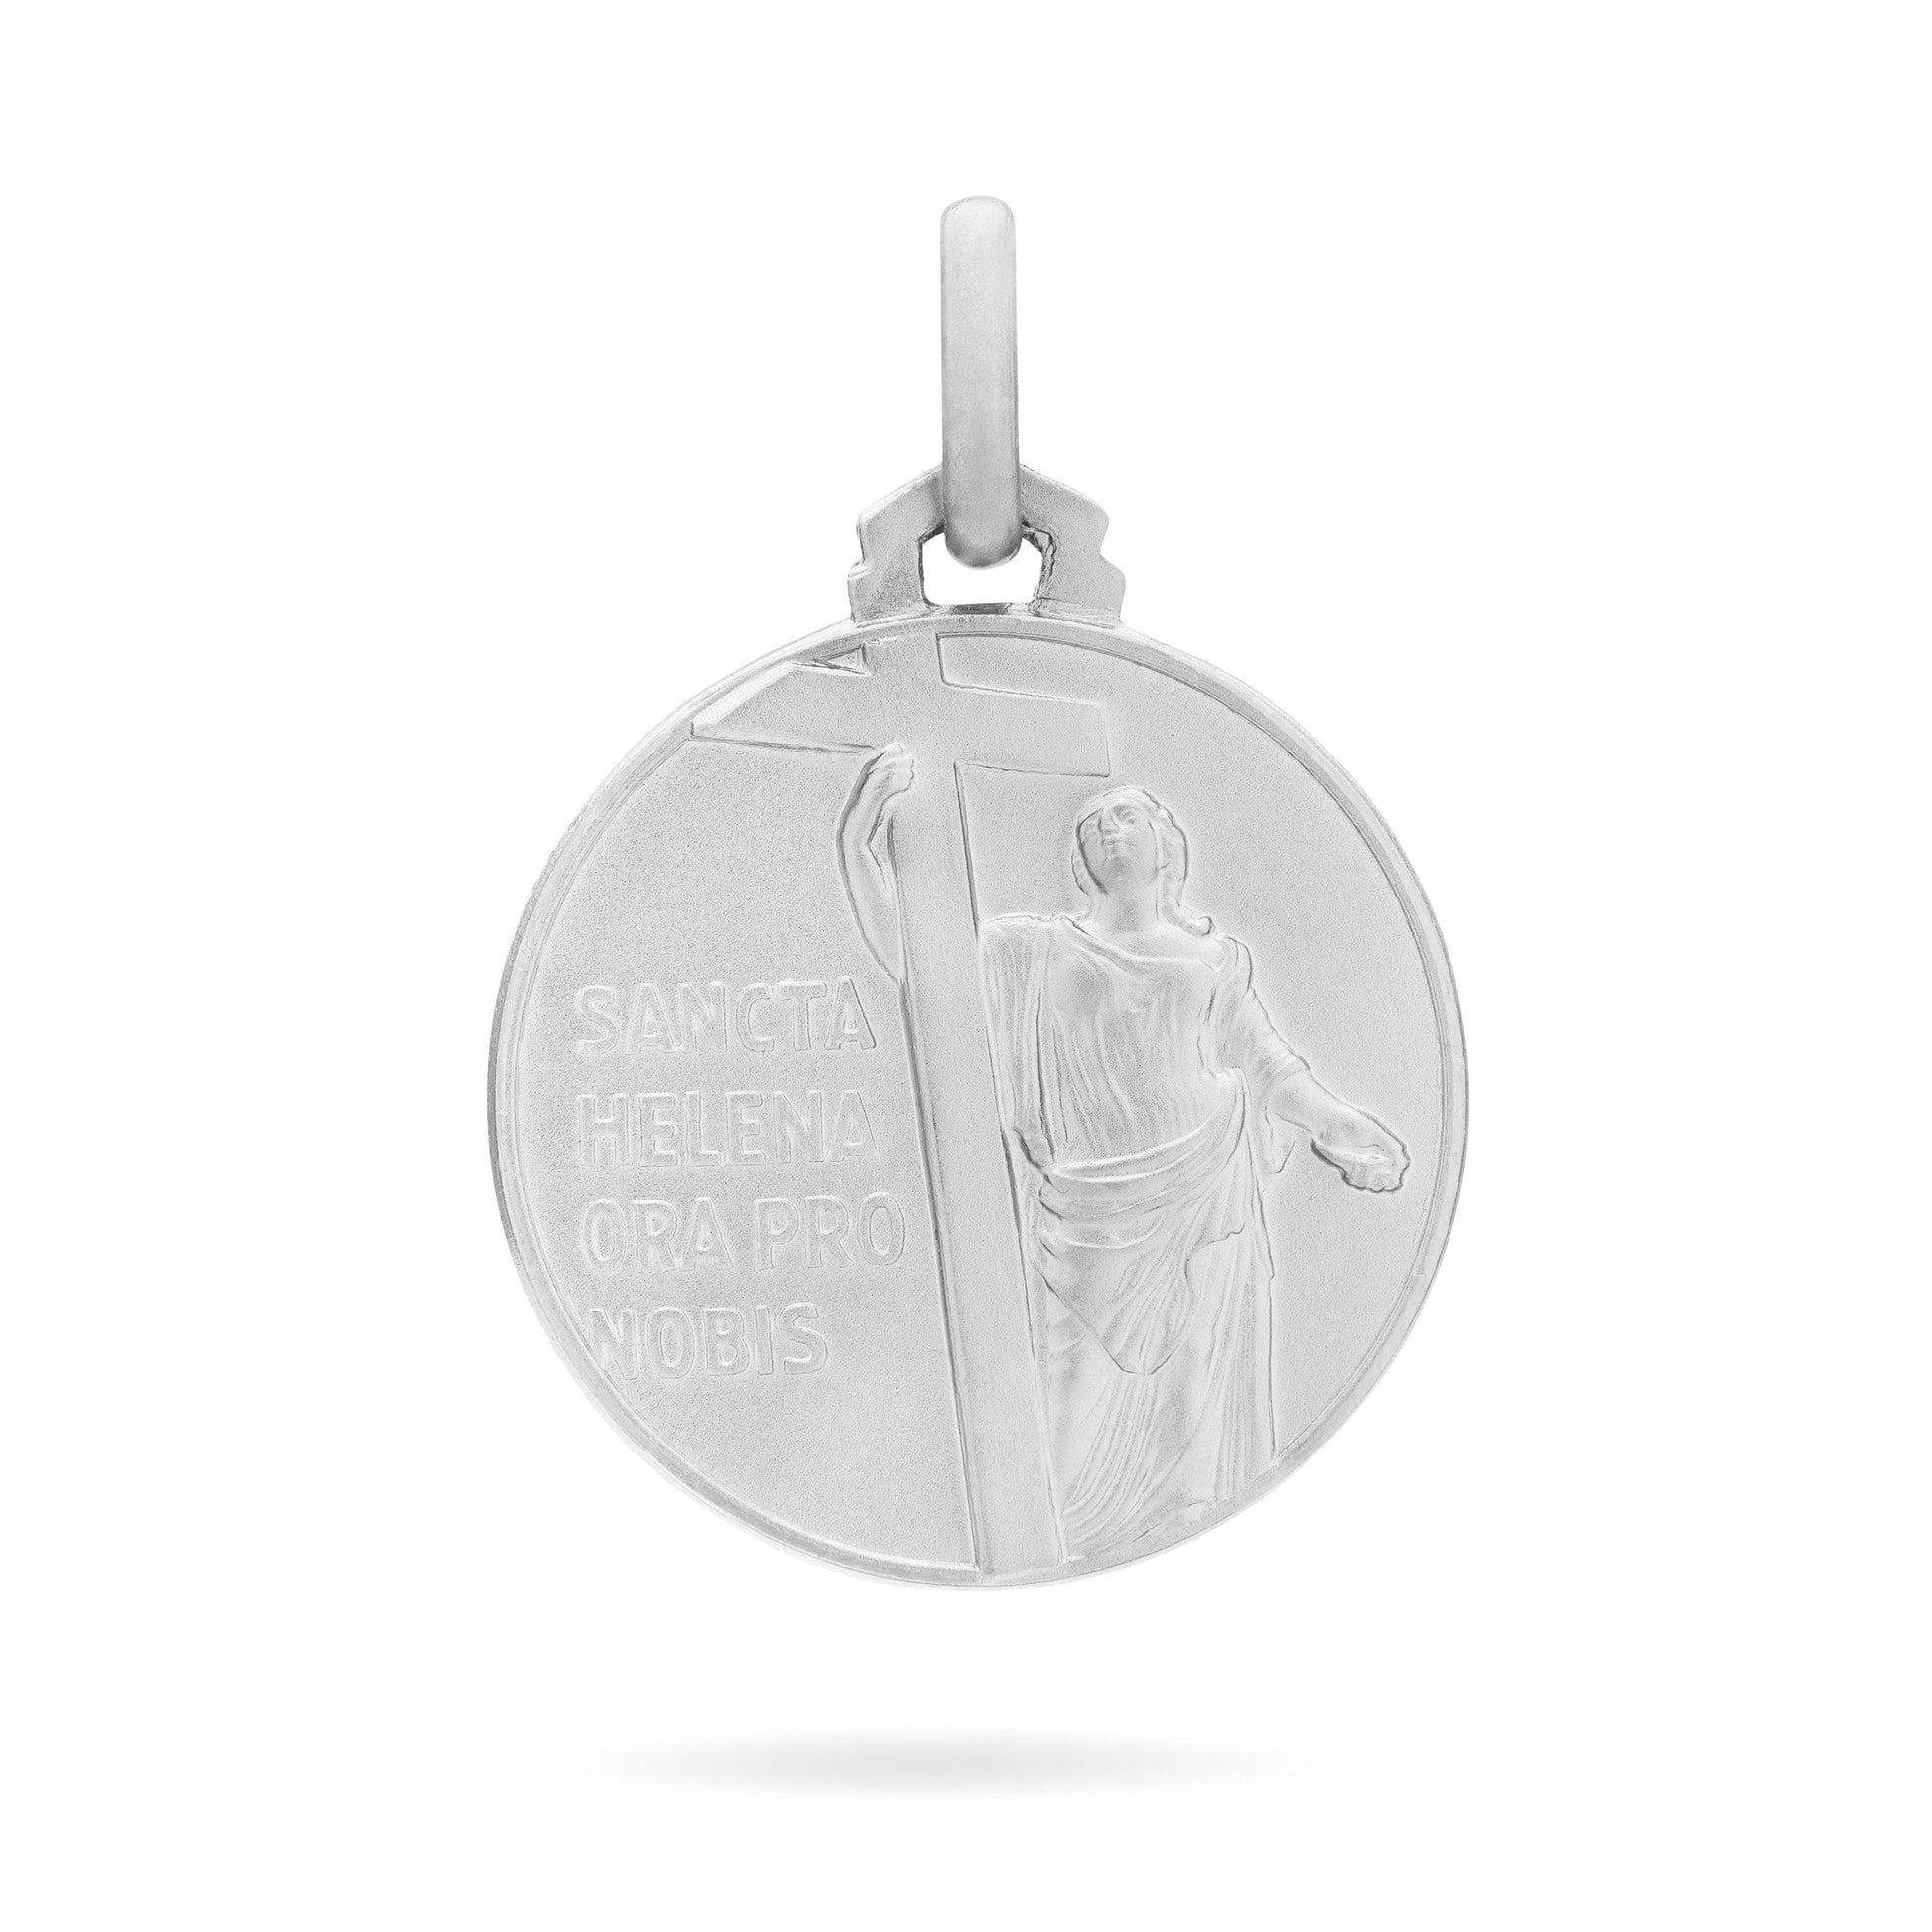 MONDO CATTOLICO Medal 18 mm (0.70 in) Sterling Silver medal of Saint Helen